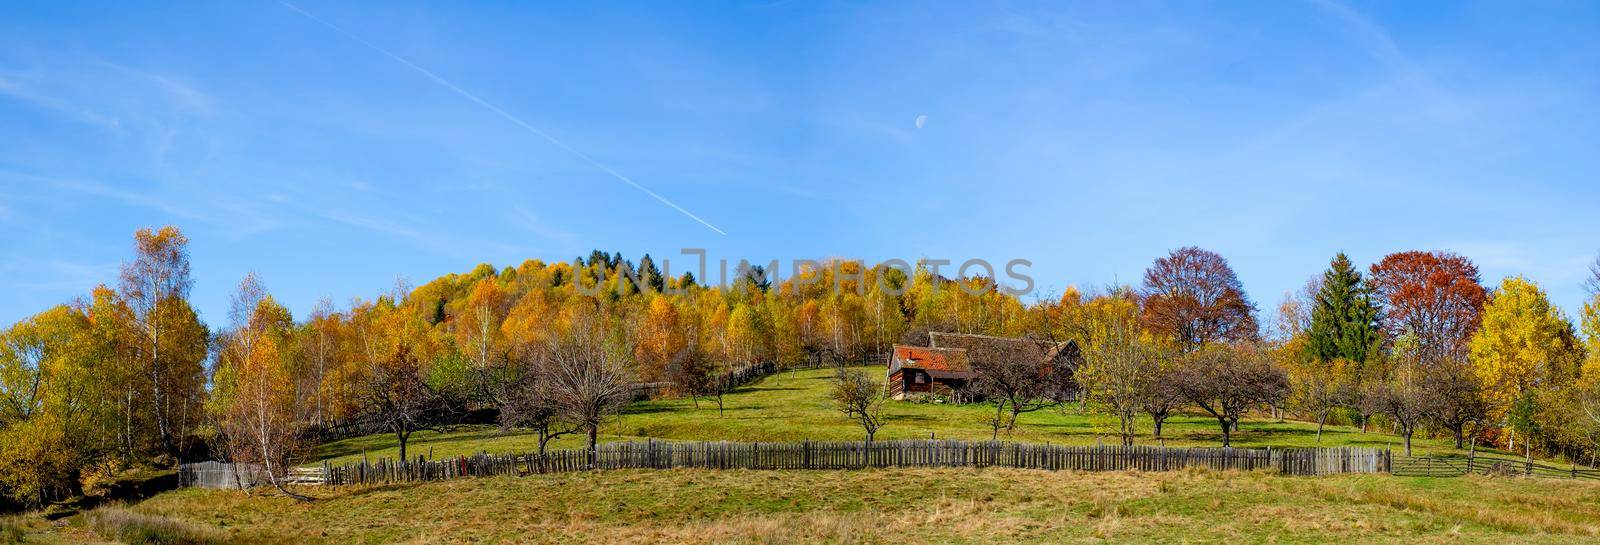 a cottage surrounded by a fence in an atmosphere of autumn with moon, Fantanele village, Sibiu county, Romania by Roberto